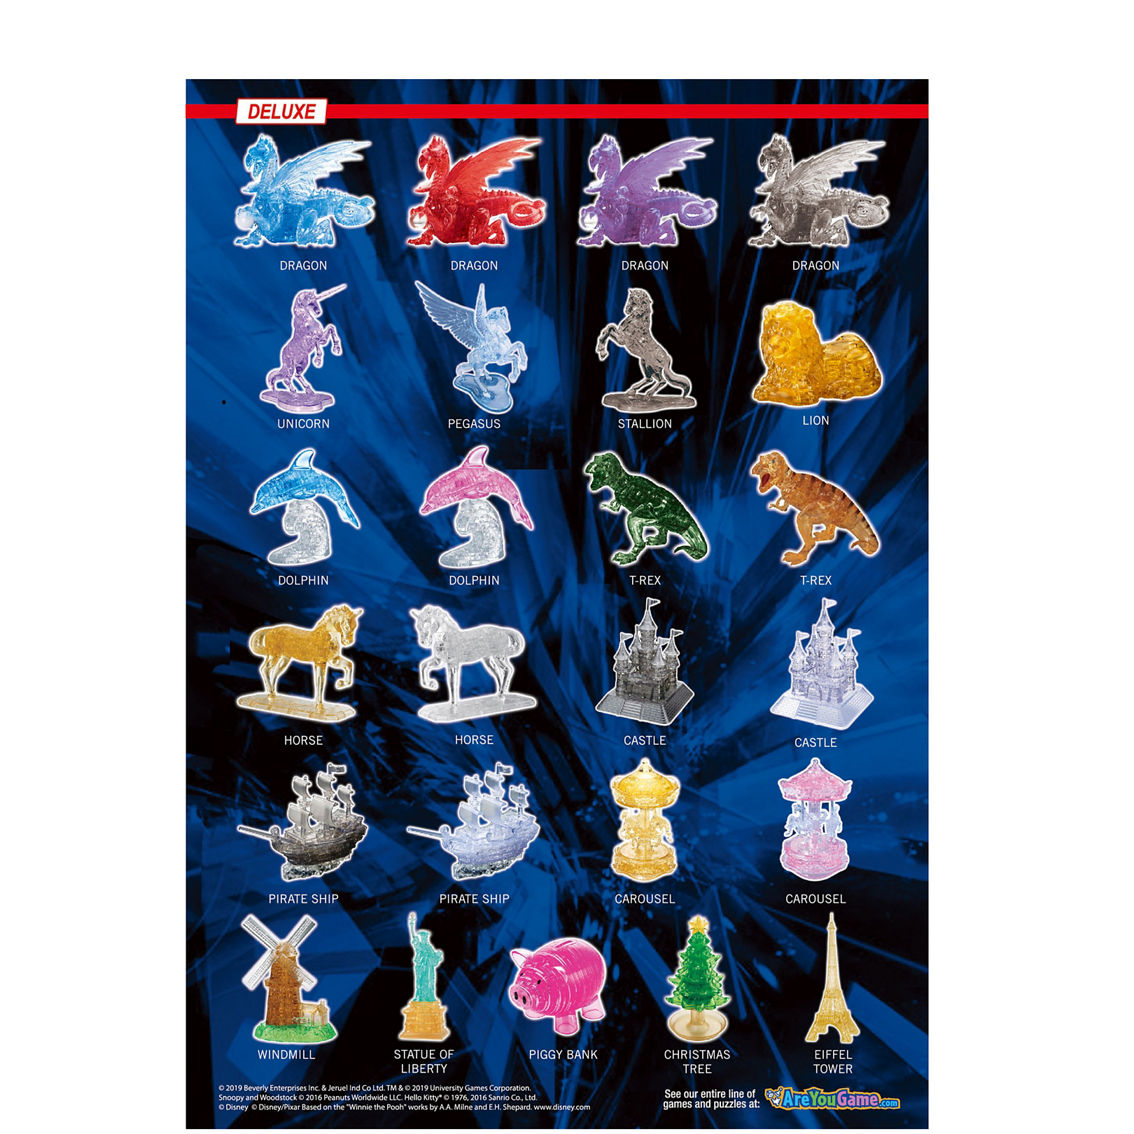 BePuzzled 3D Crystal Puzzle - Dragon (Clear): 57 Pcs - Image 5 of 5